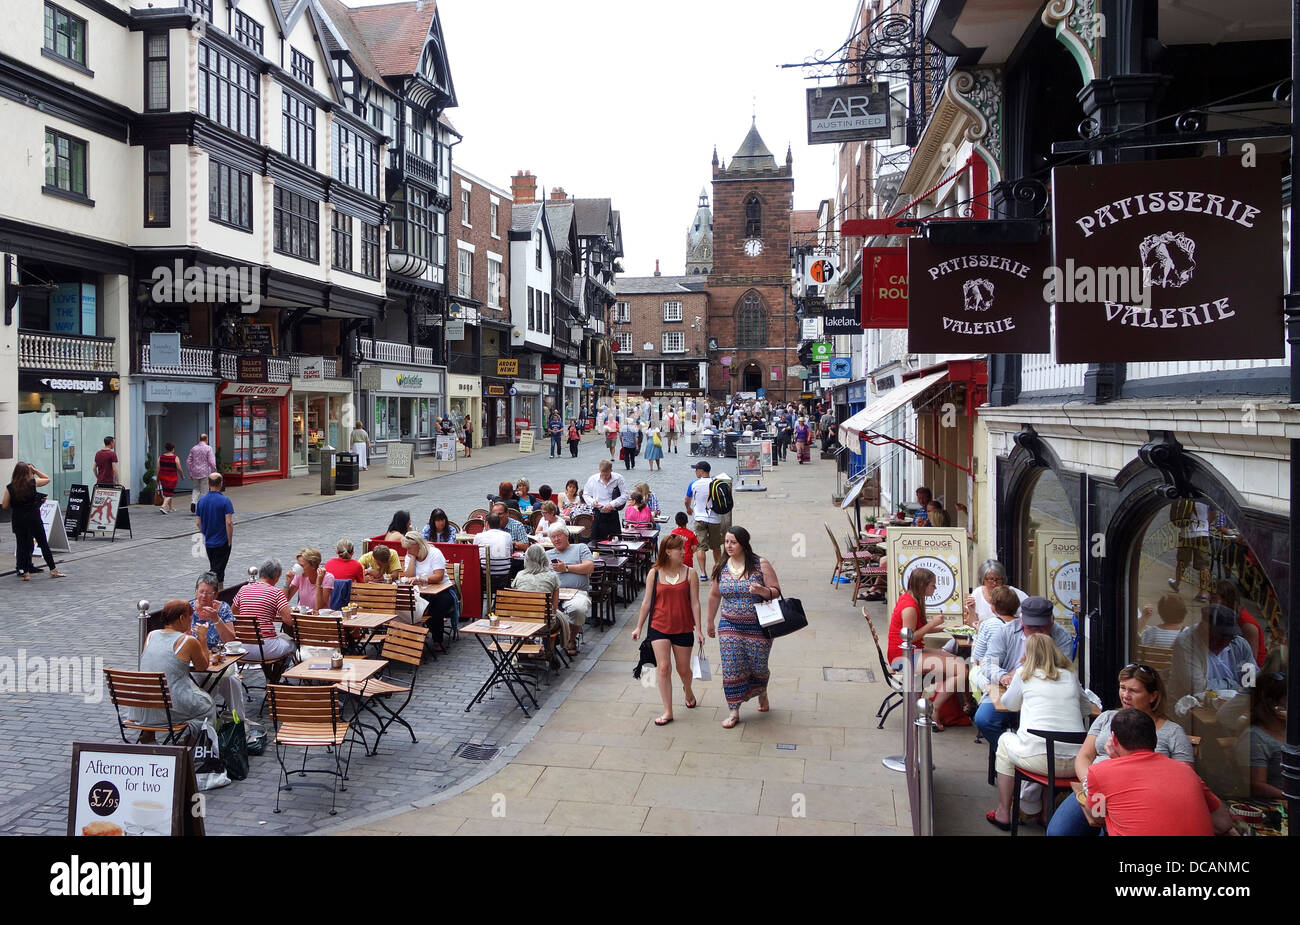 Pavement cafes in bridge street, Chester, England Stock Photo